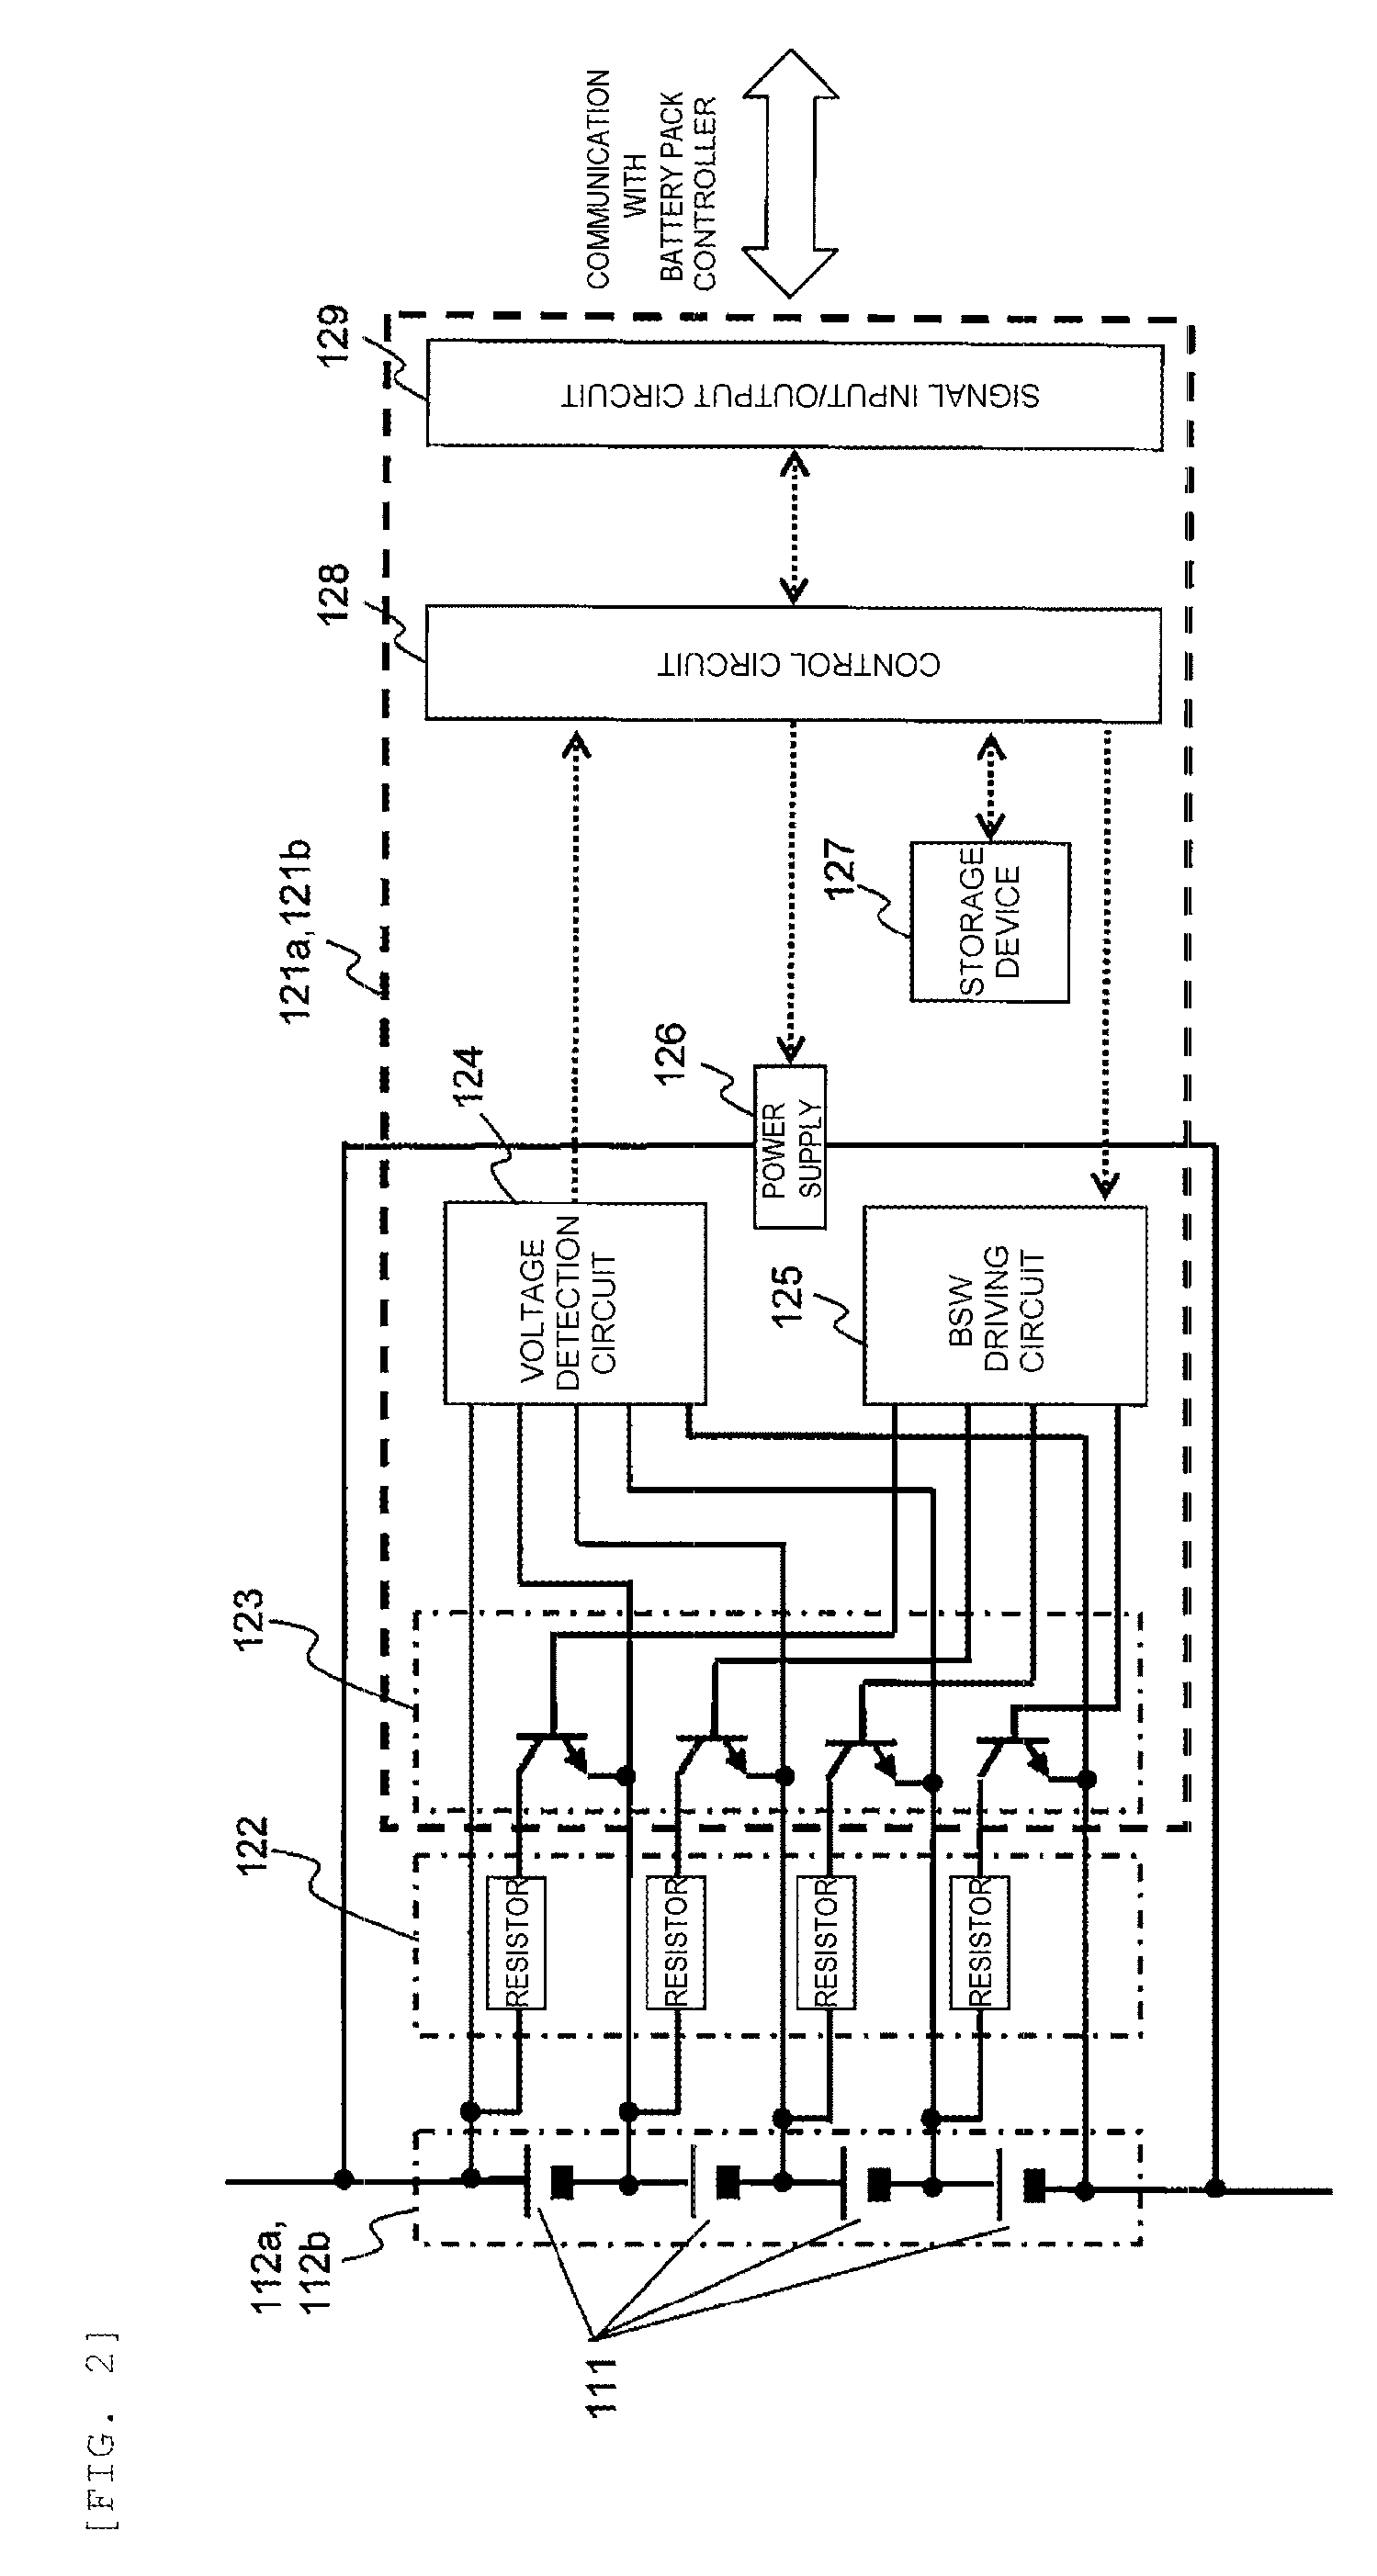 Electric storage cell control circuit